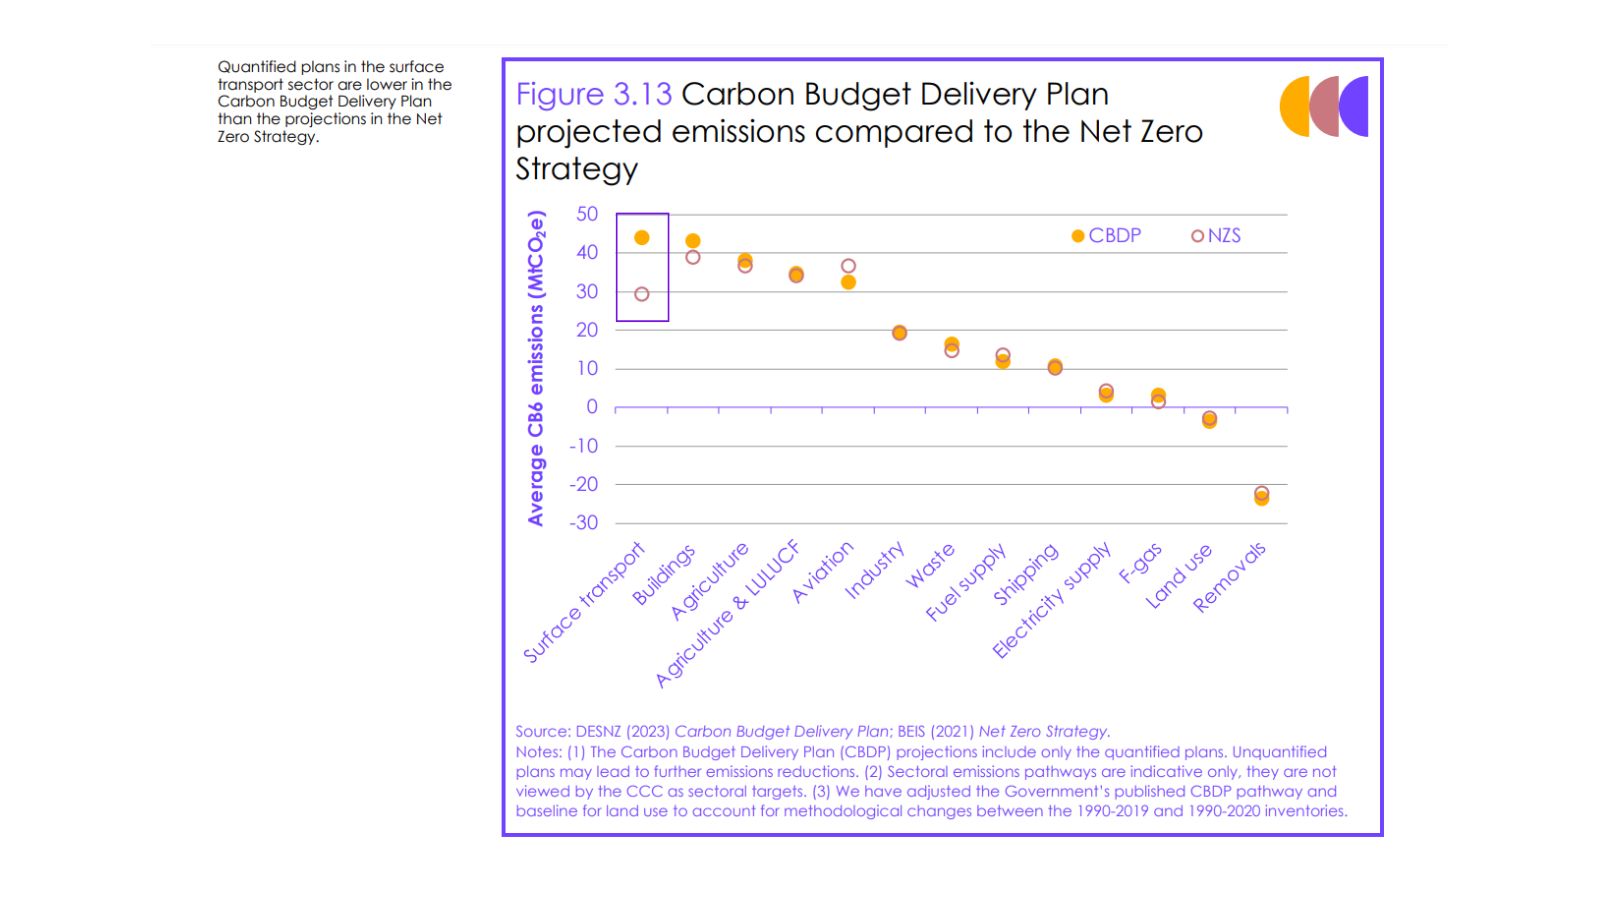 Carbon Budget Delivery Plan projected emissions compared to the Net Zero Strategy from Climate Change Committee report